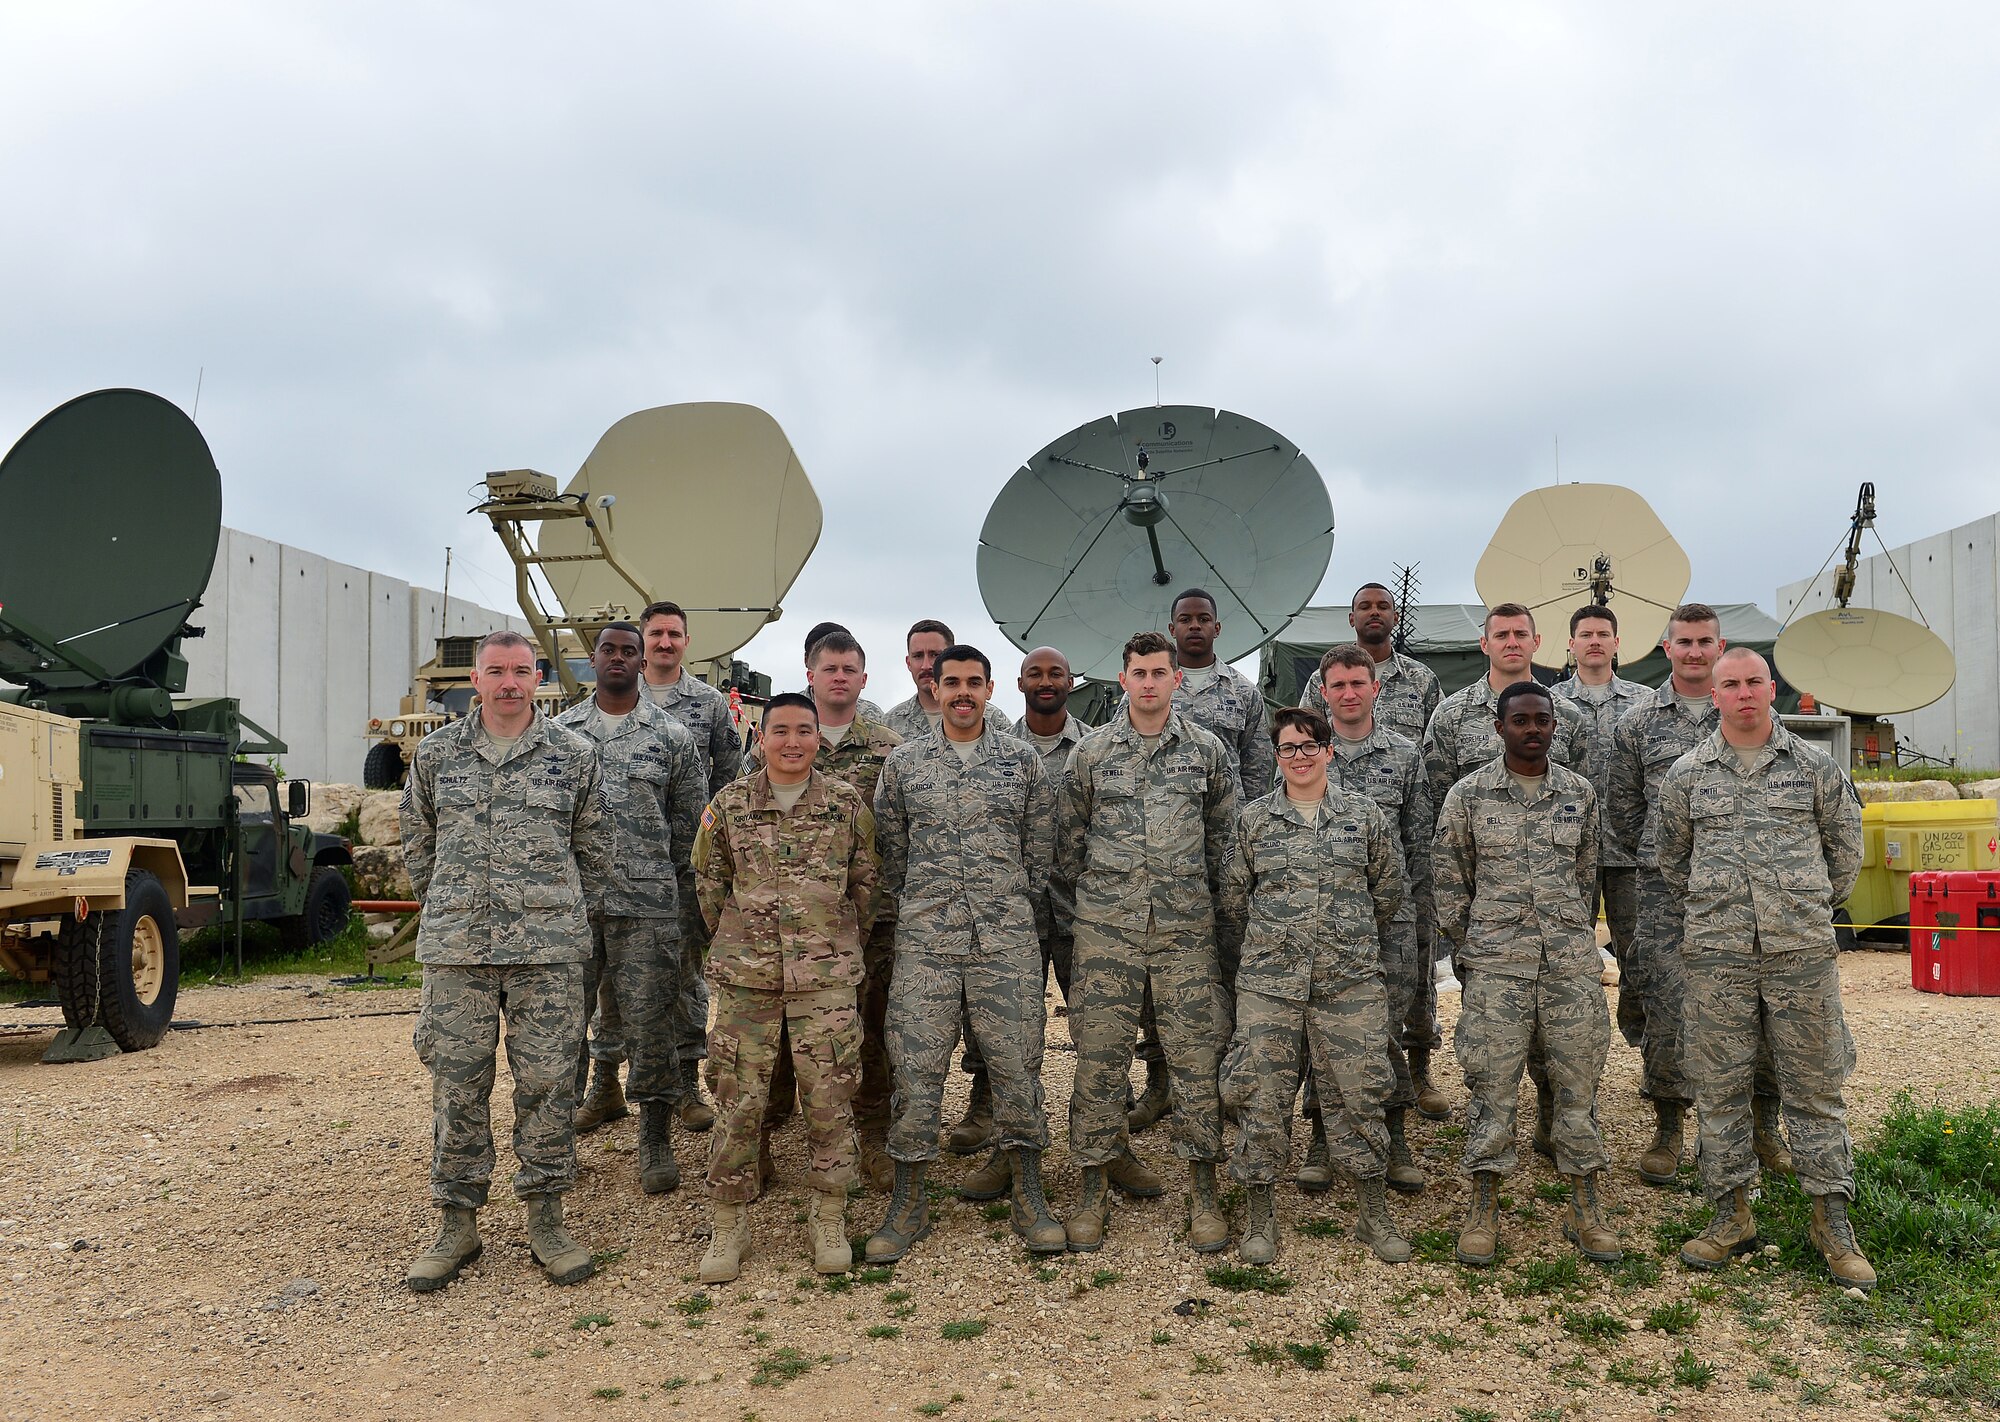 Airmen from the 1st Combat Communications Squadron, 52nd CBCS and soldiers from the 44th Expeditionary Signals Battalion work together to support U.S. European Command exercise Juniper Cobra 16 in Israel, March 3, 2016. Juniper Cobra uses ballistic missile defense computer simulations to train U.S. and Israeli service members while reinforcing a strong military relationship.